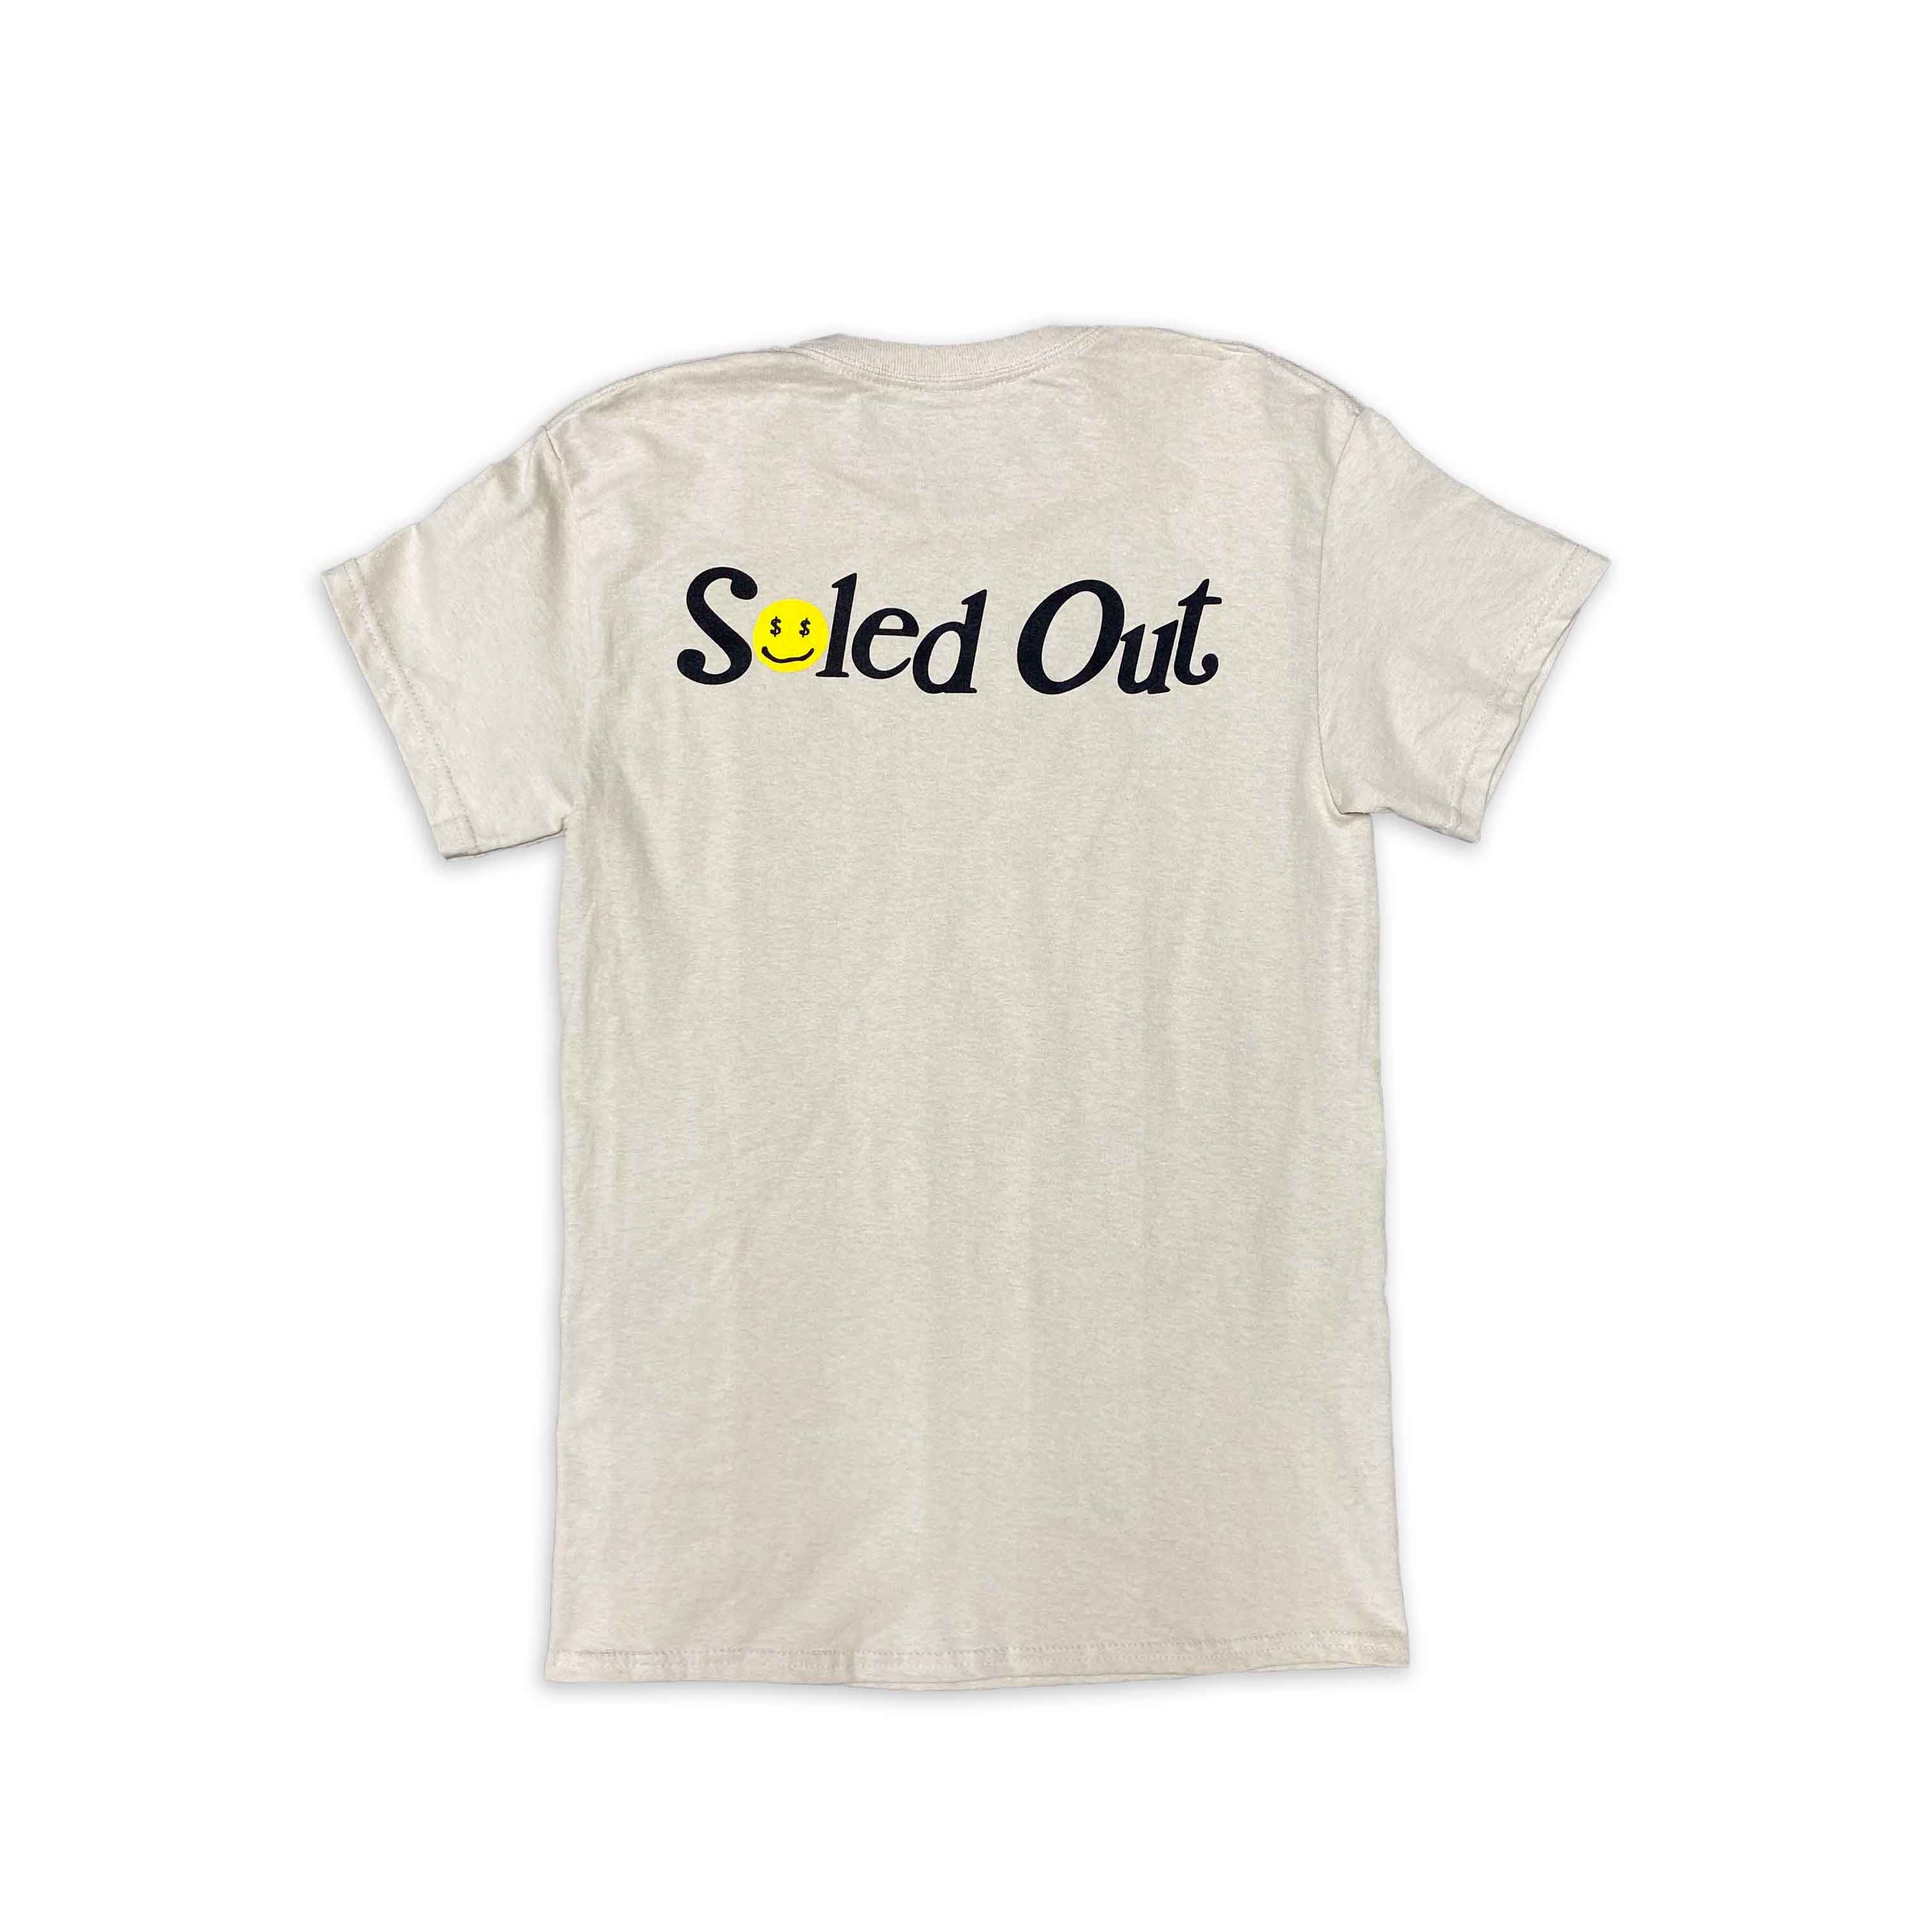 Soled Out T-Shirt "EXPENSIVE" Sand New Size M